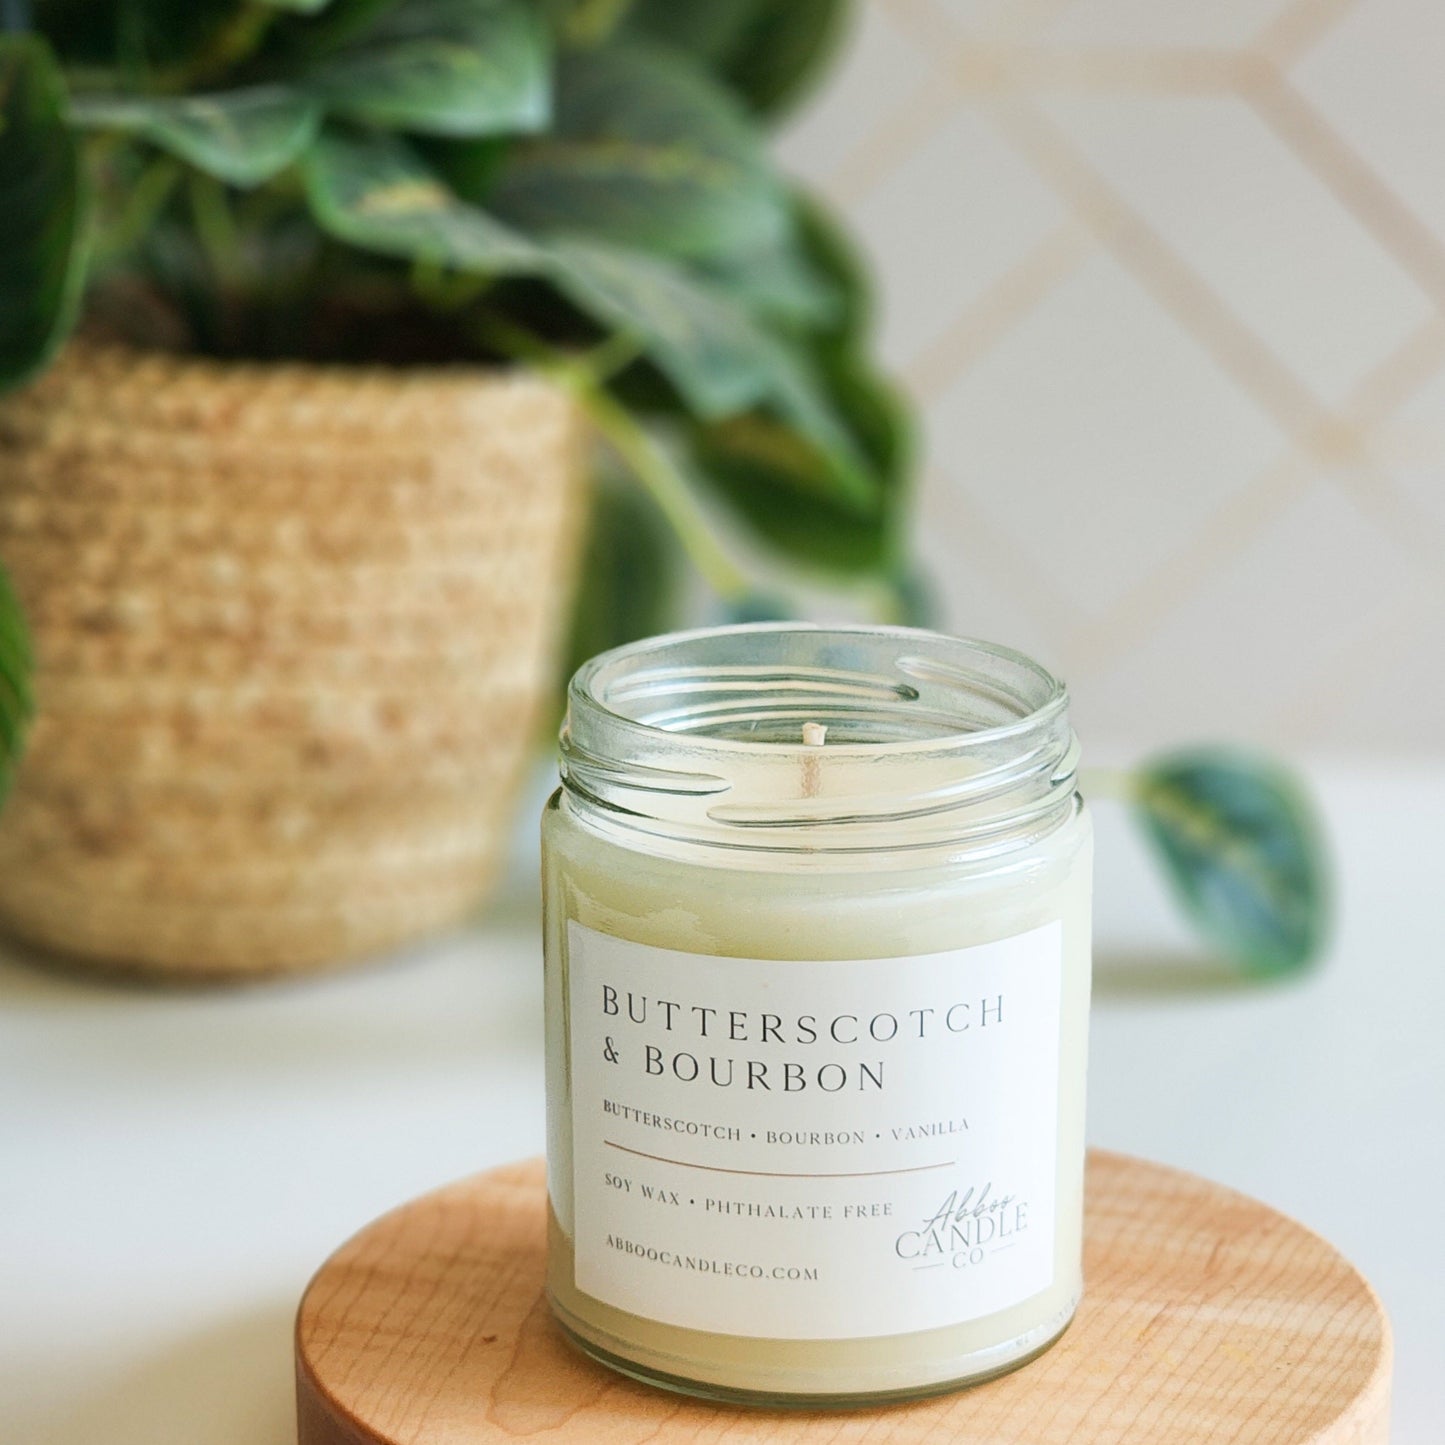 Butterscotch and Bourbon Soy Candle with Twist Lid - Abboo Candle Co® Wholesale